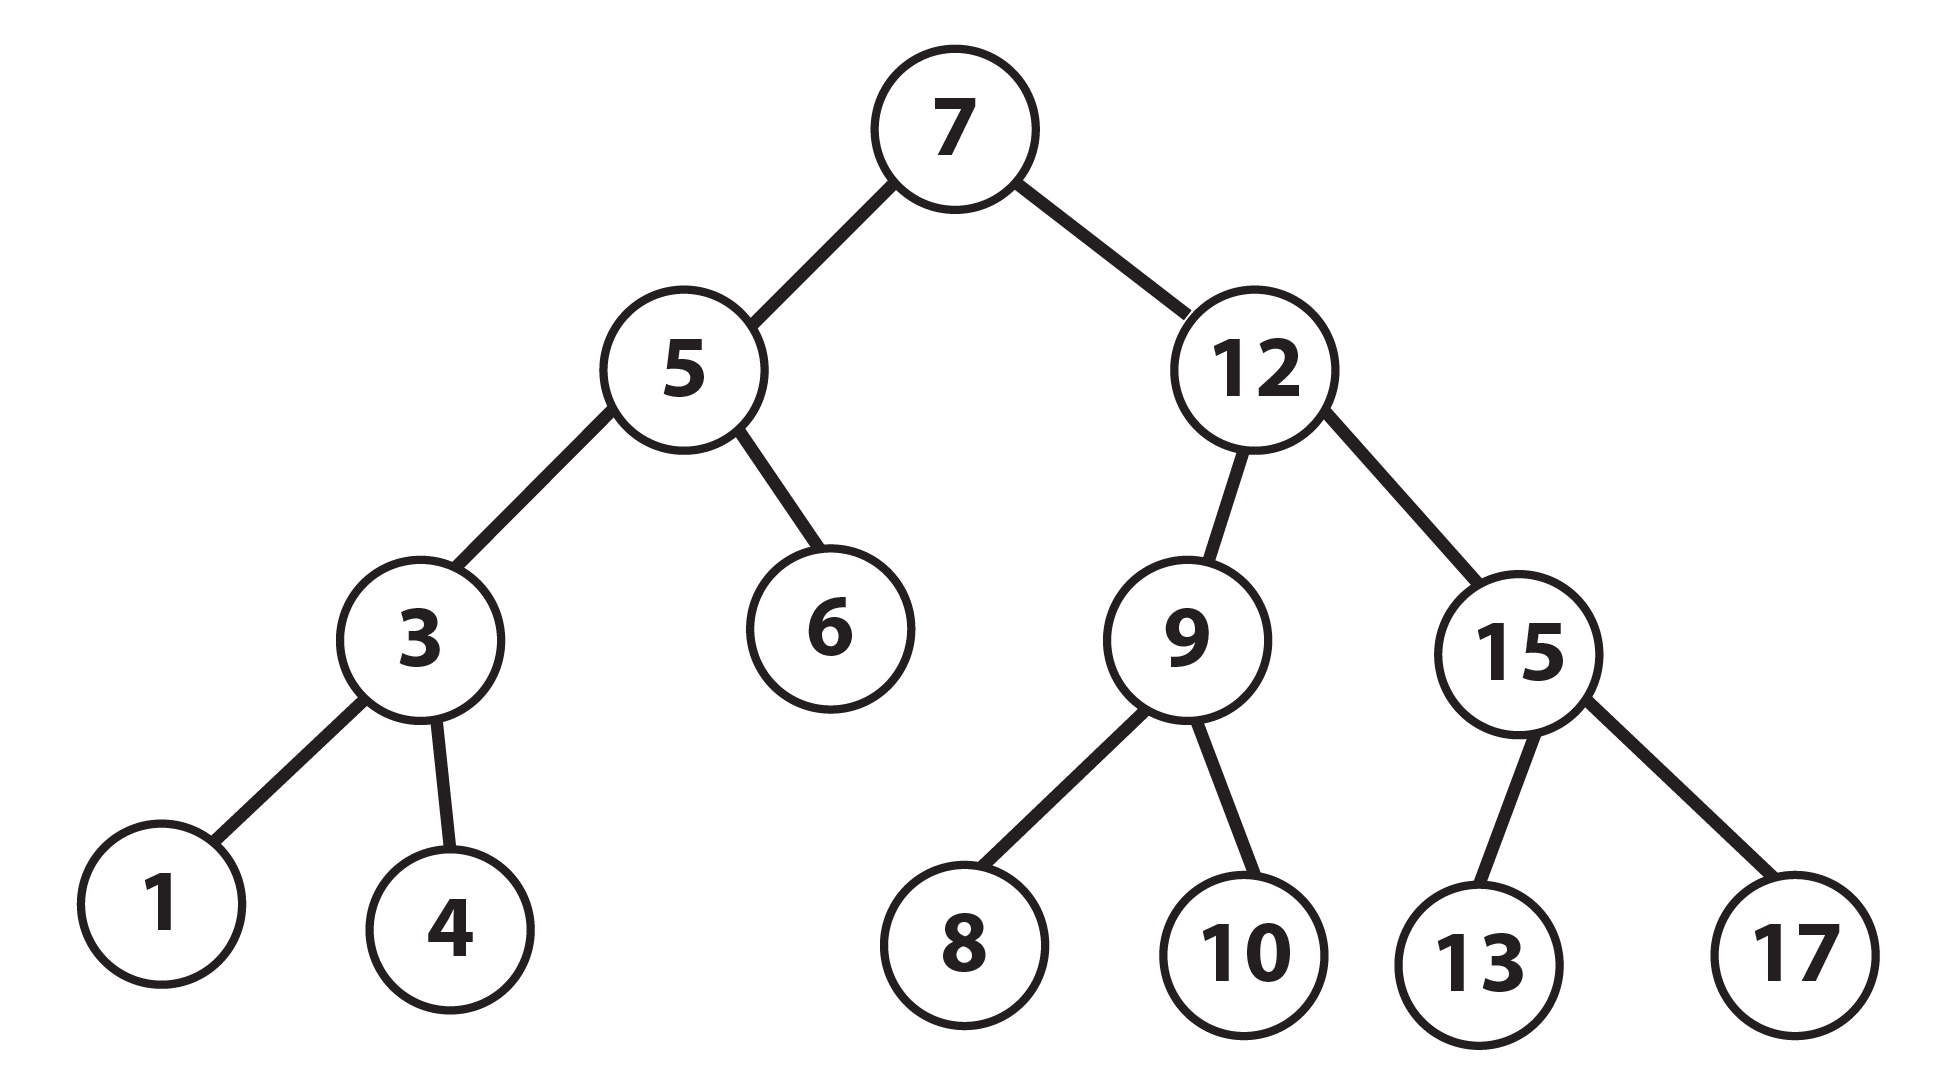 A simple binary search tree.